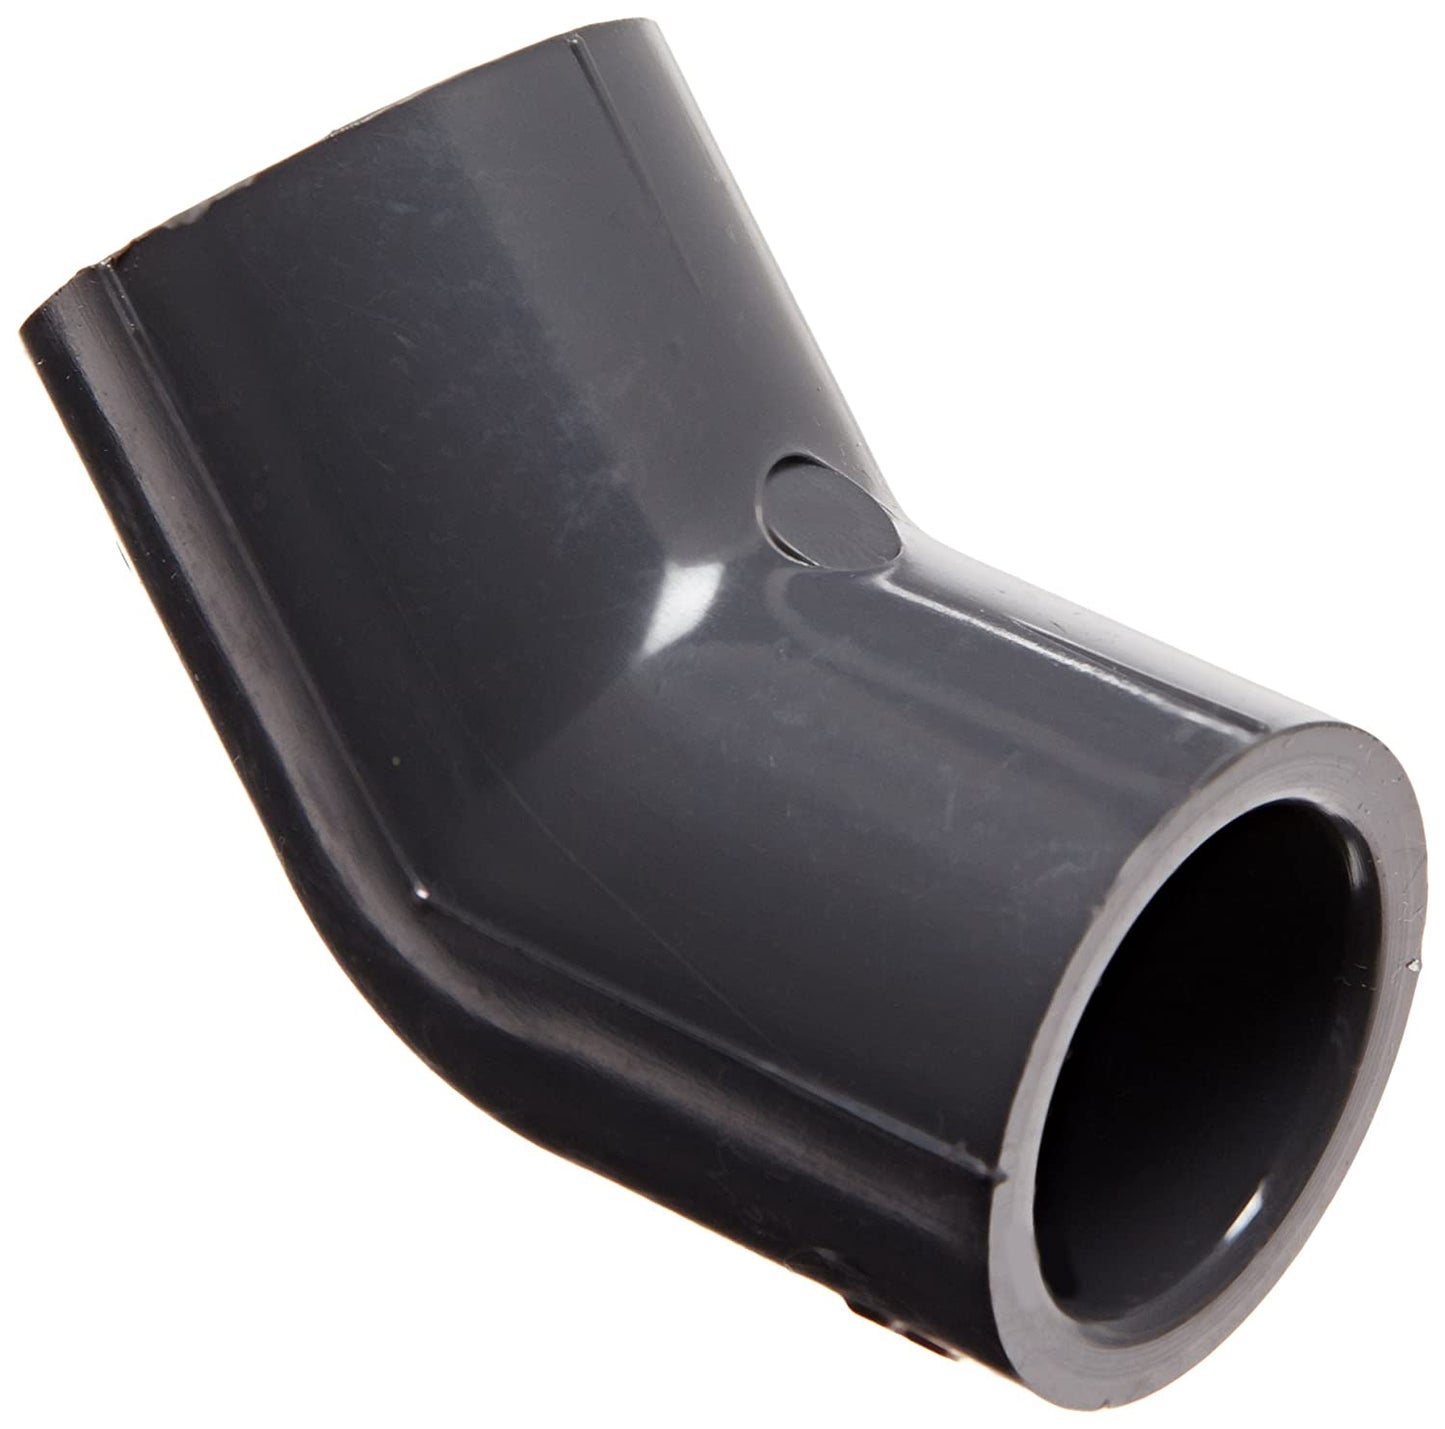 817-005 - PVC Pipe Fitting, 45 Degree Elbow, Schedule 80, 1/2" Socket